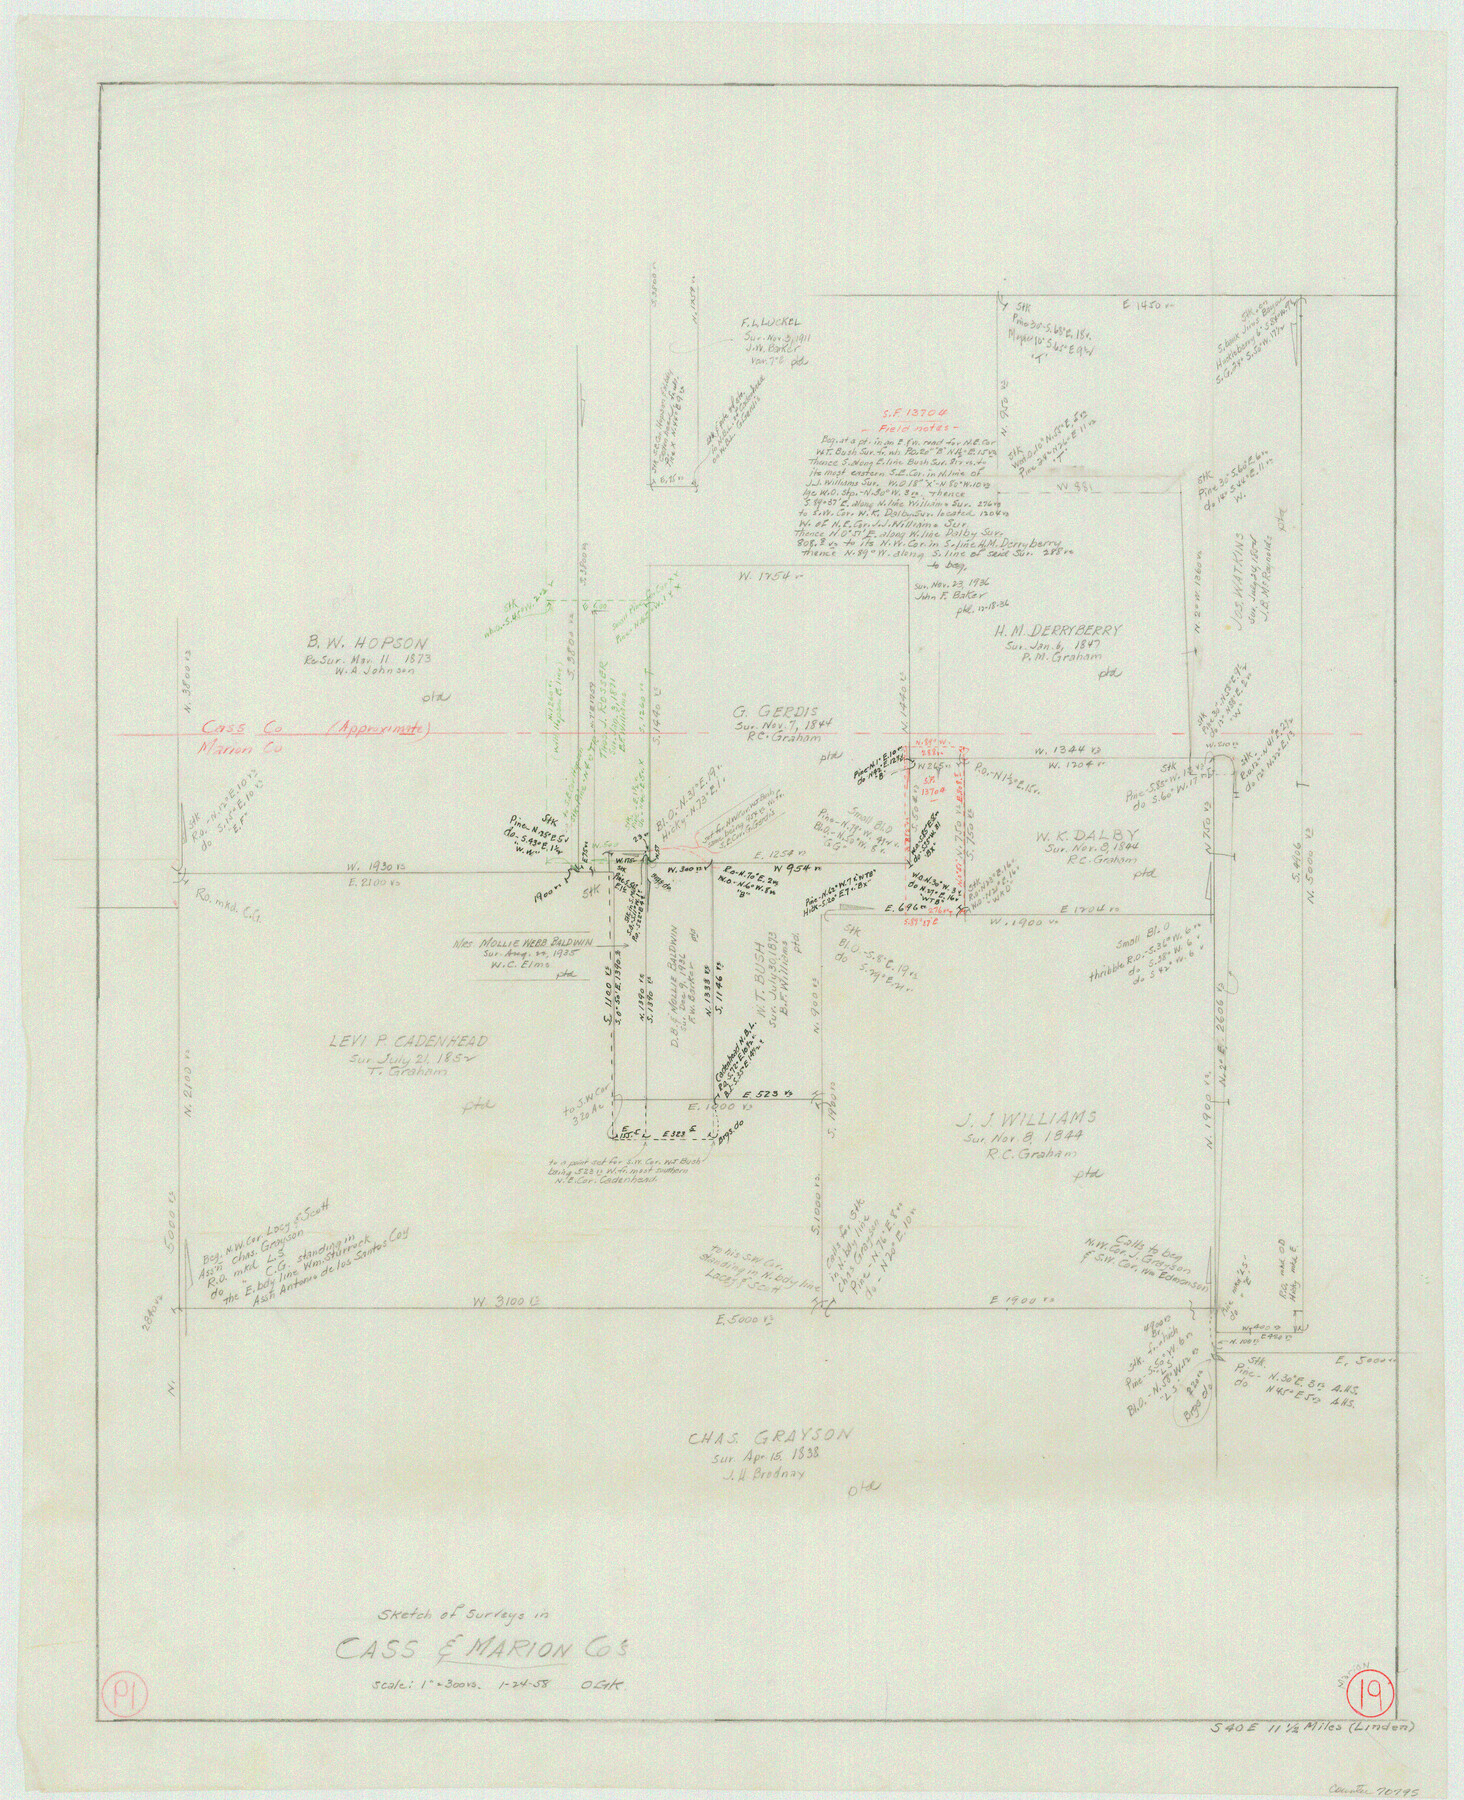 70795, Marion County Working Sketch 19, General Map Collection